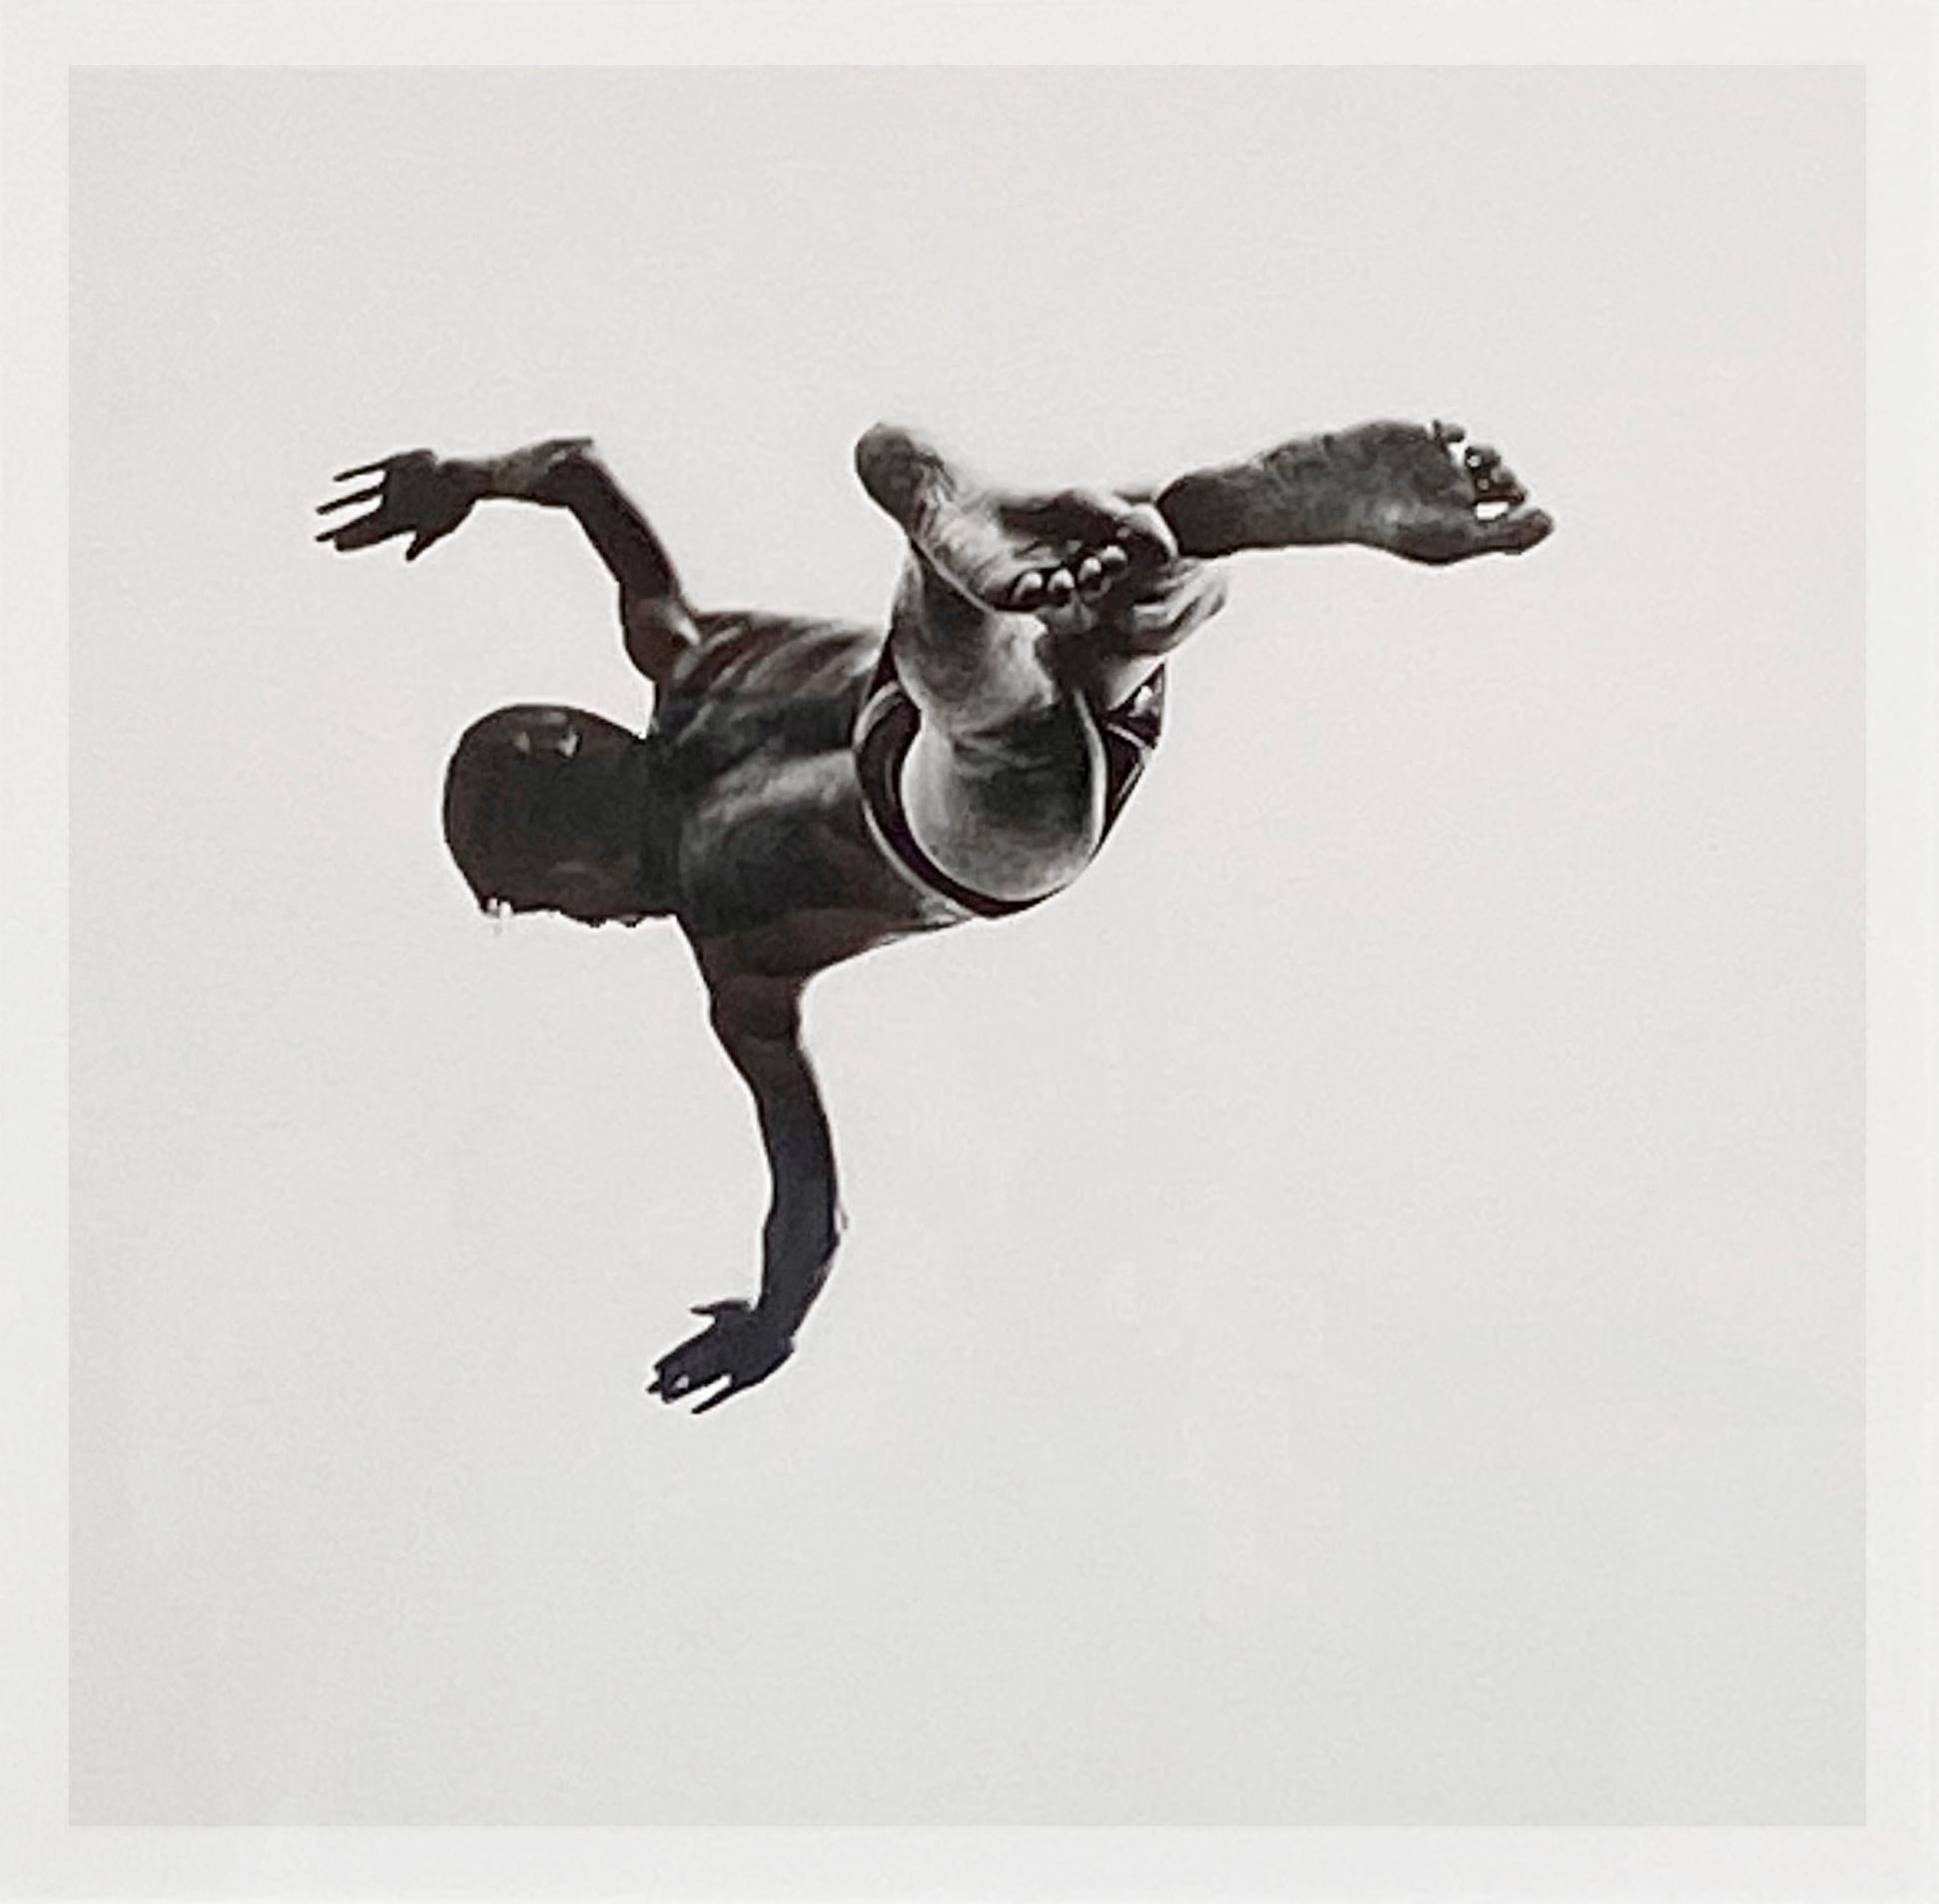 Pleasures and Terrors of Levitation - Photorealist Photograph by Aaron Siskind